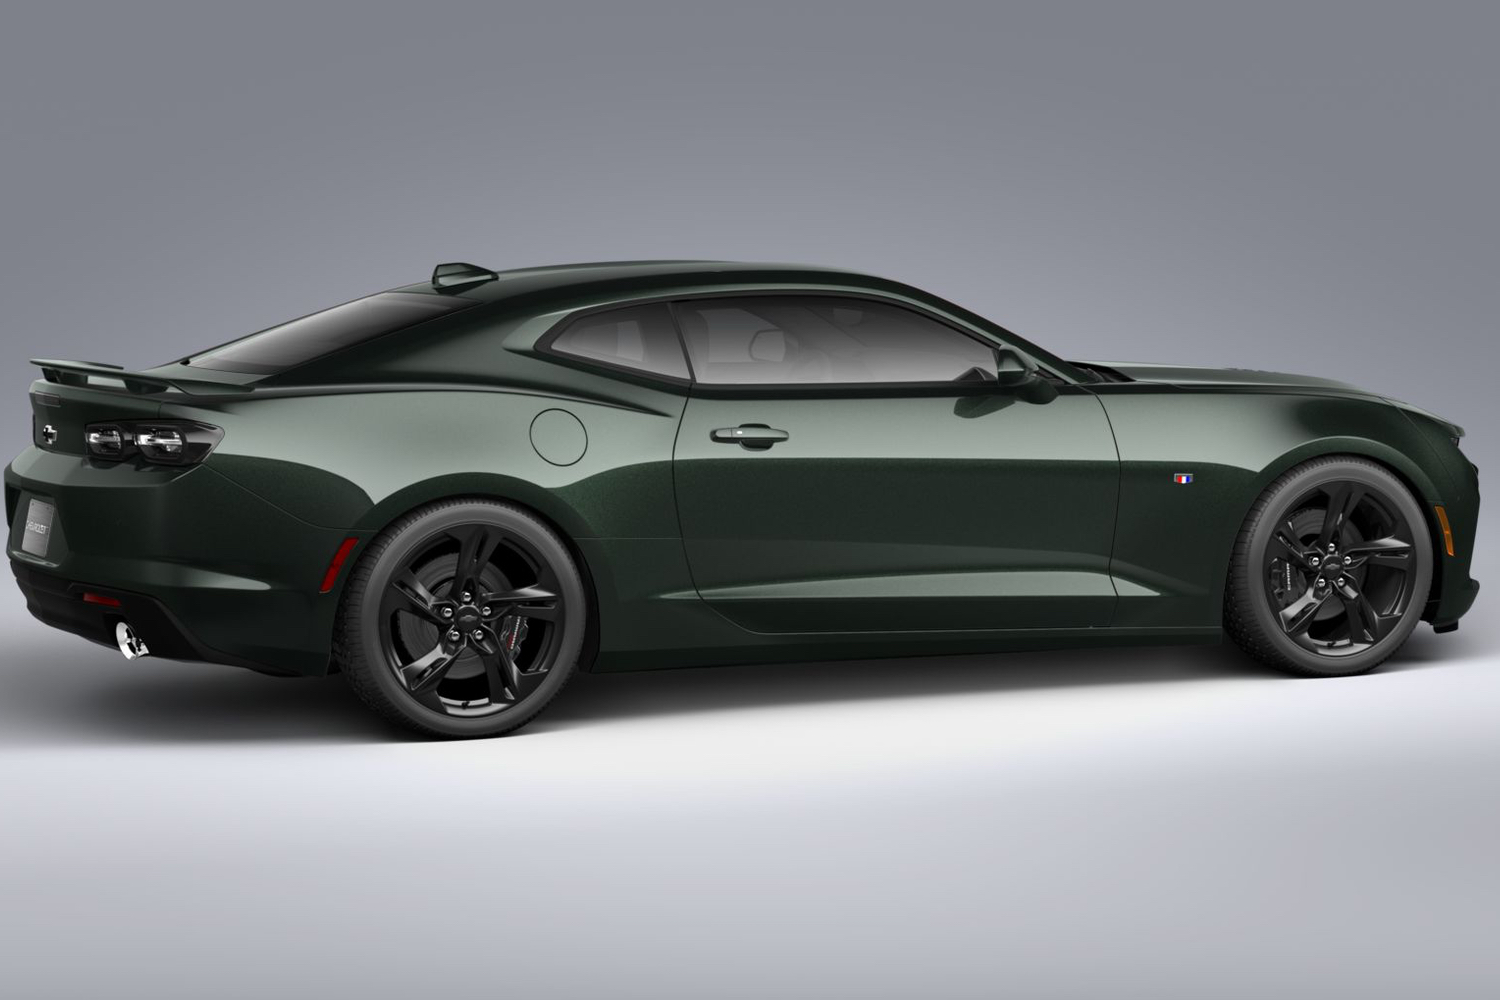 2020 Camaro More Images Of New Rally Green Metallic Color